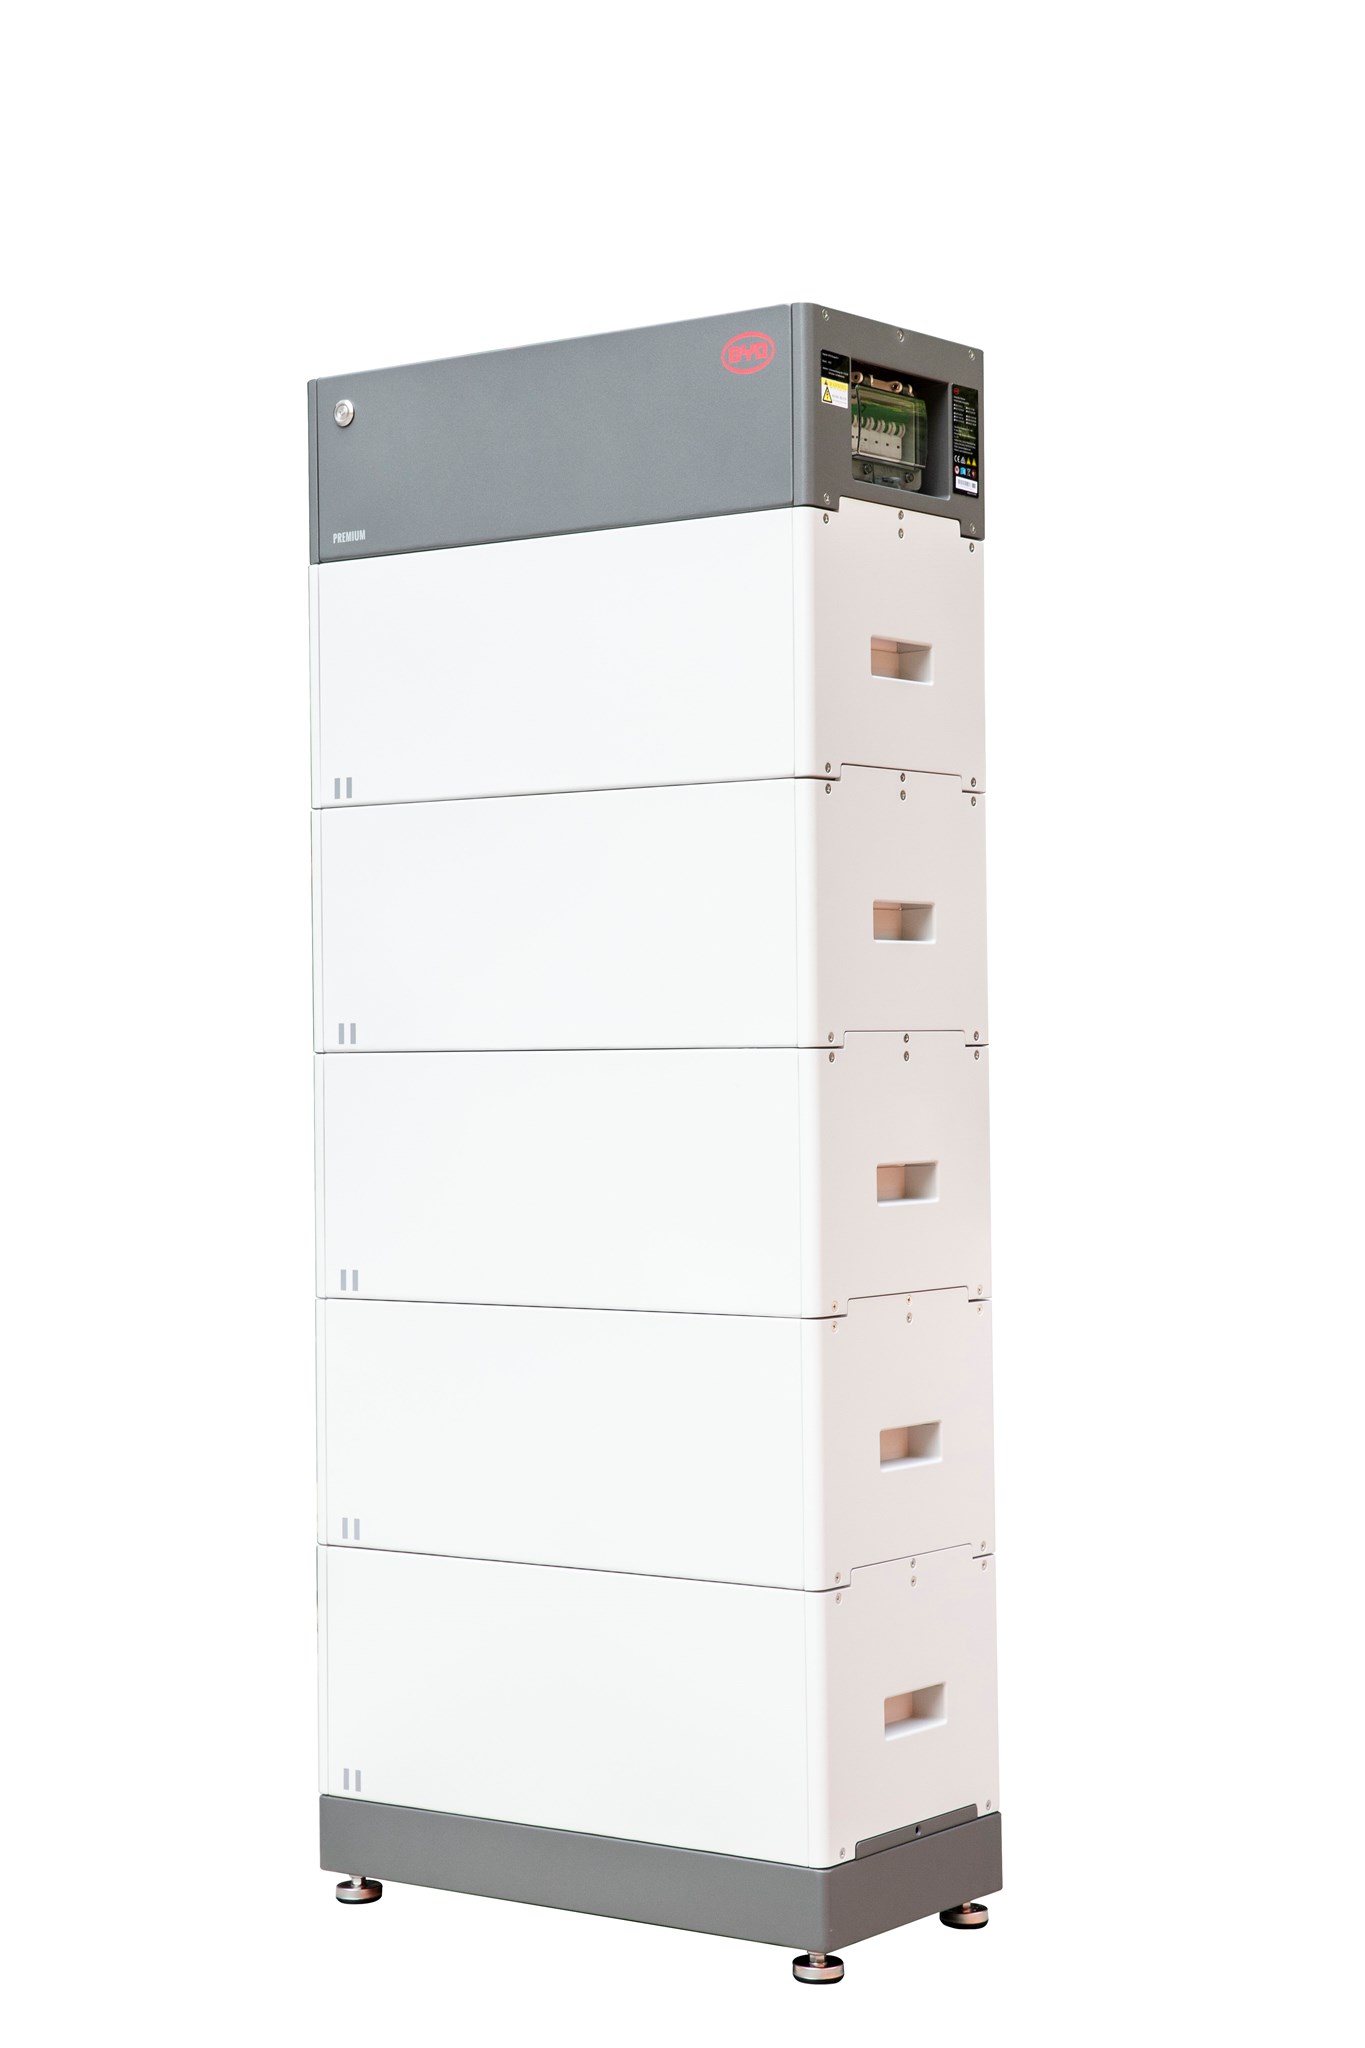 Picture of BYD Battery-Box Premium LVS 20.0 - 20 kW 5 x 4 kW/h (PV battery storage)